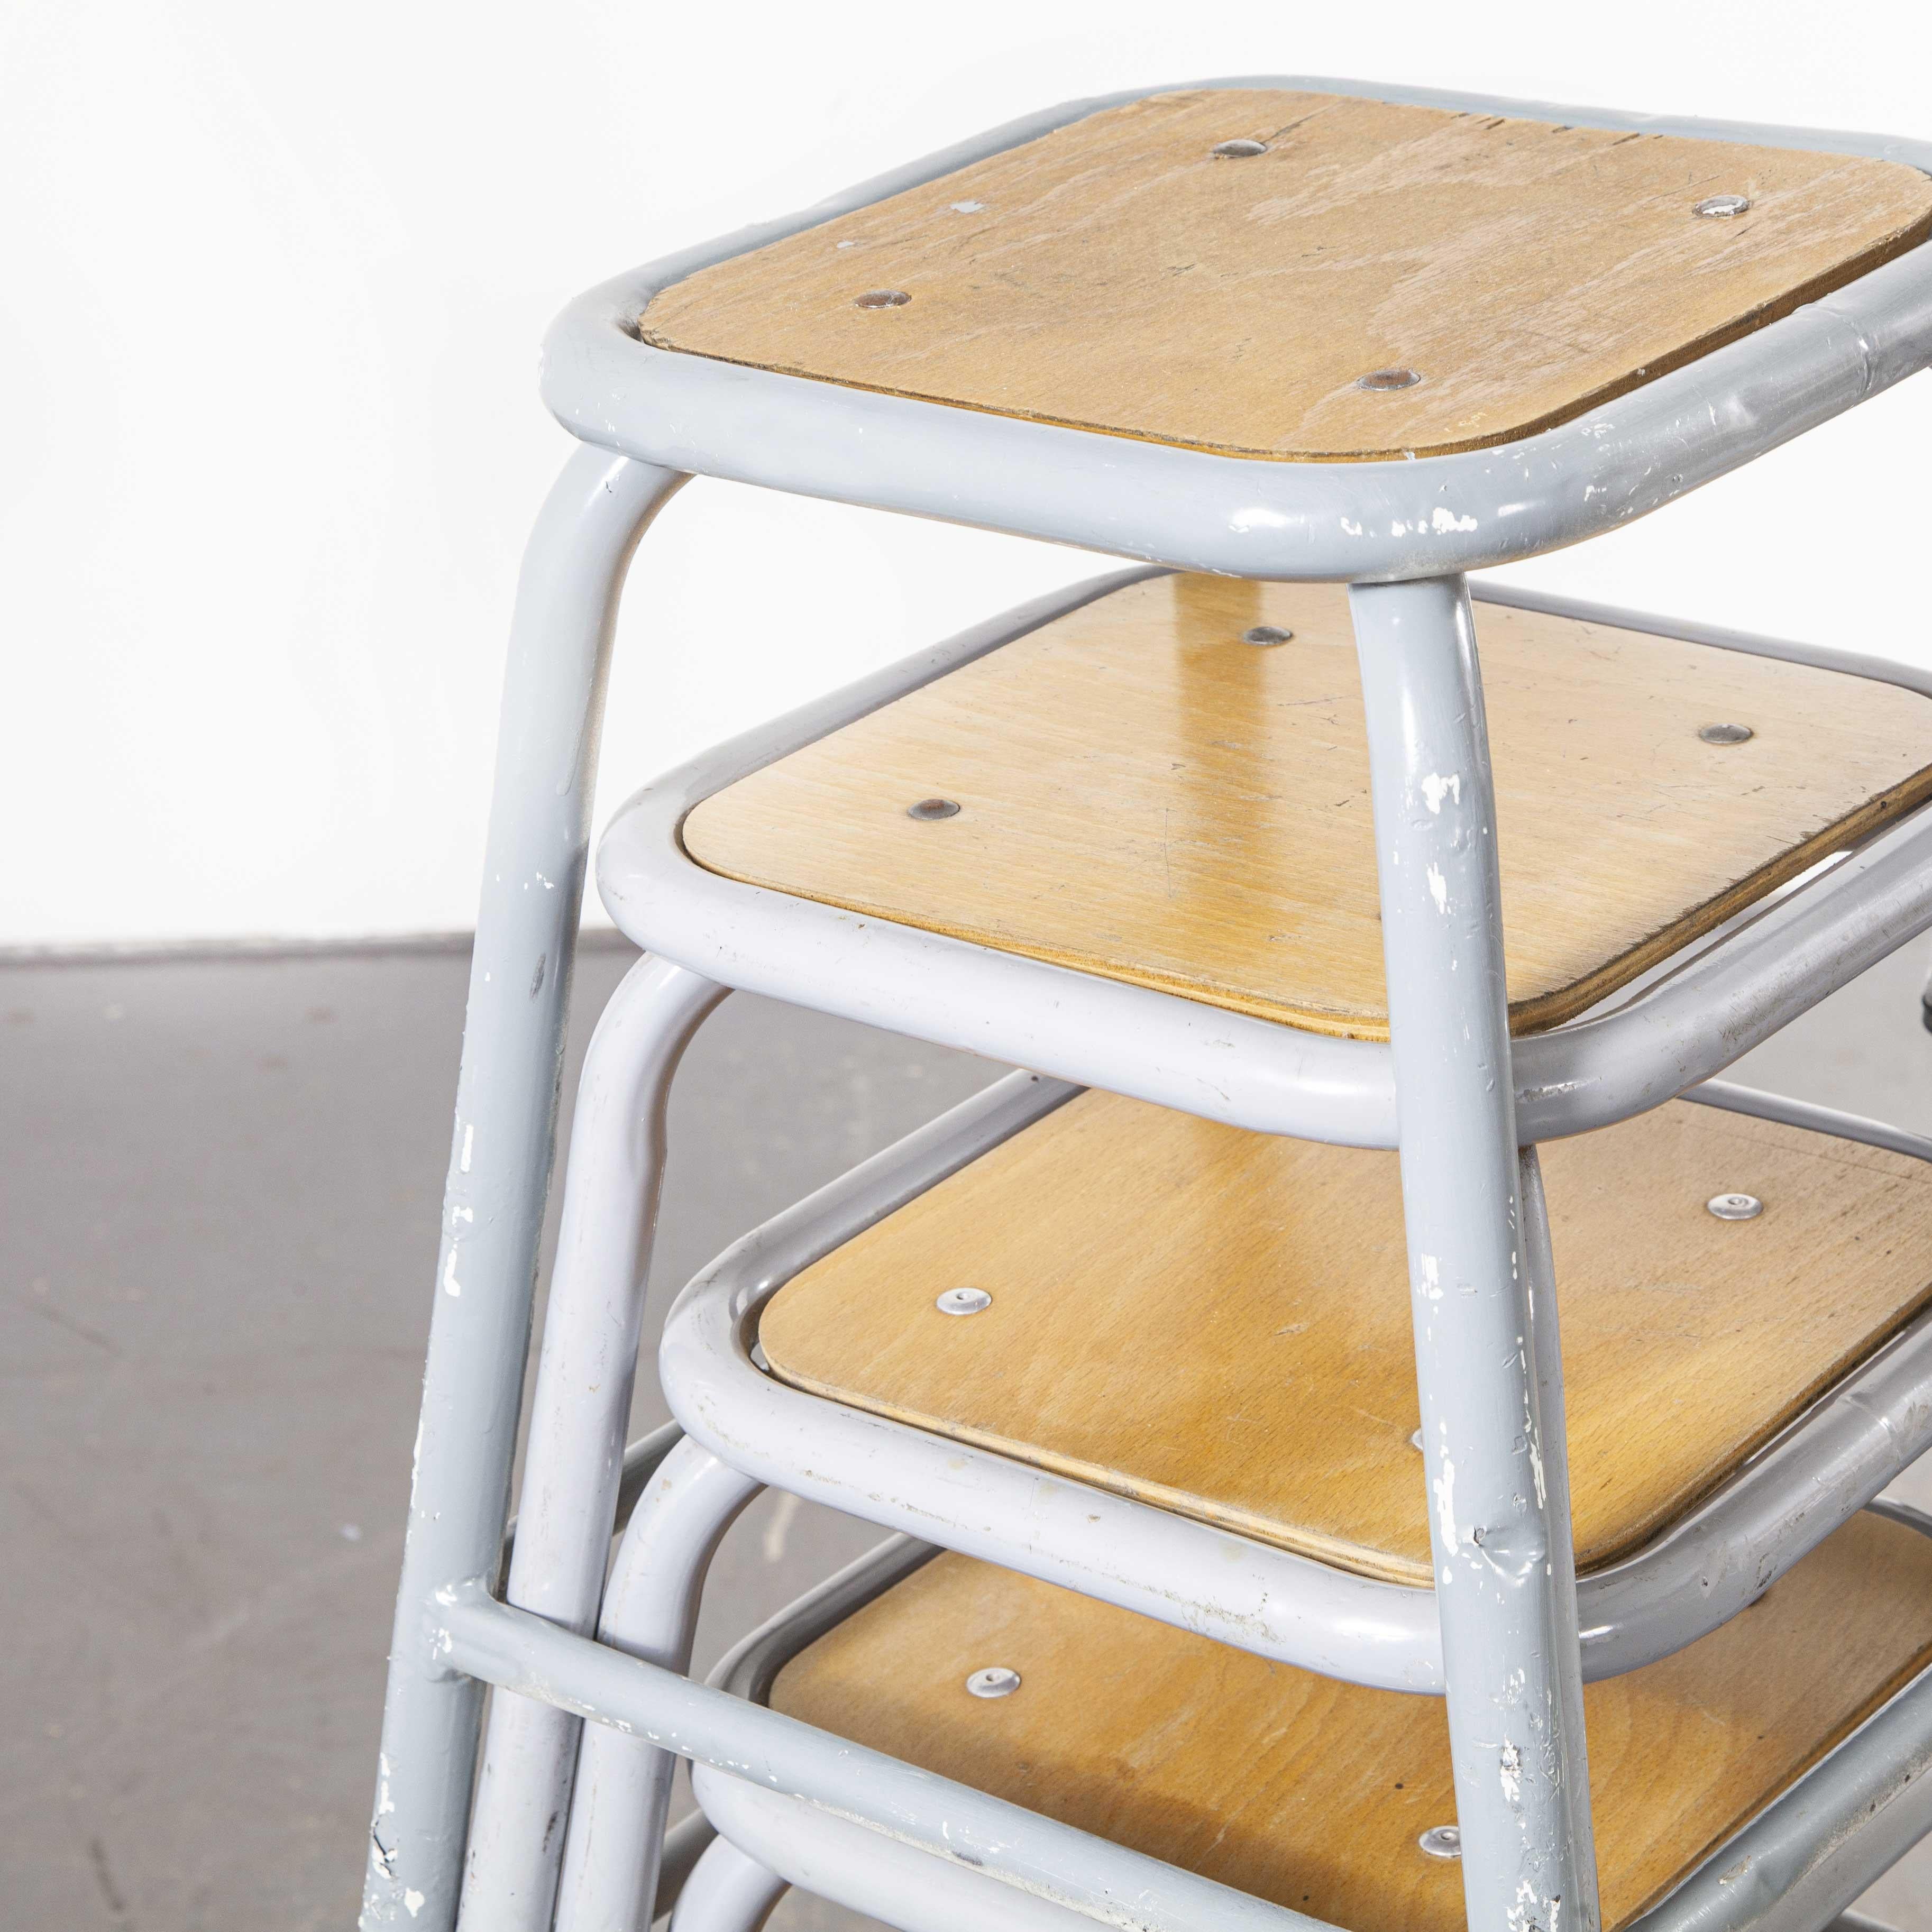 1960s Mullca low stacking stool – Grey – Various quantities available
1960s Mullca low stacking stool – grey – various quantities available. Sourced from the French Army these stools were used in field operations as bedside tables/stools. In 1947